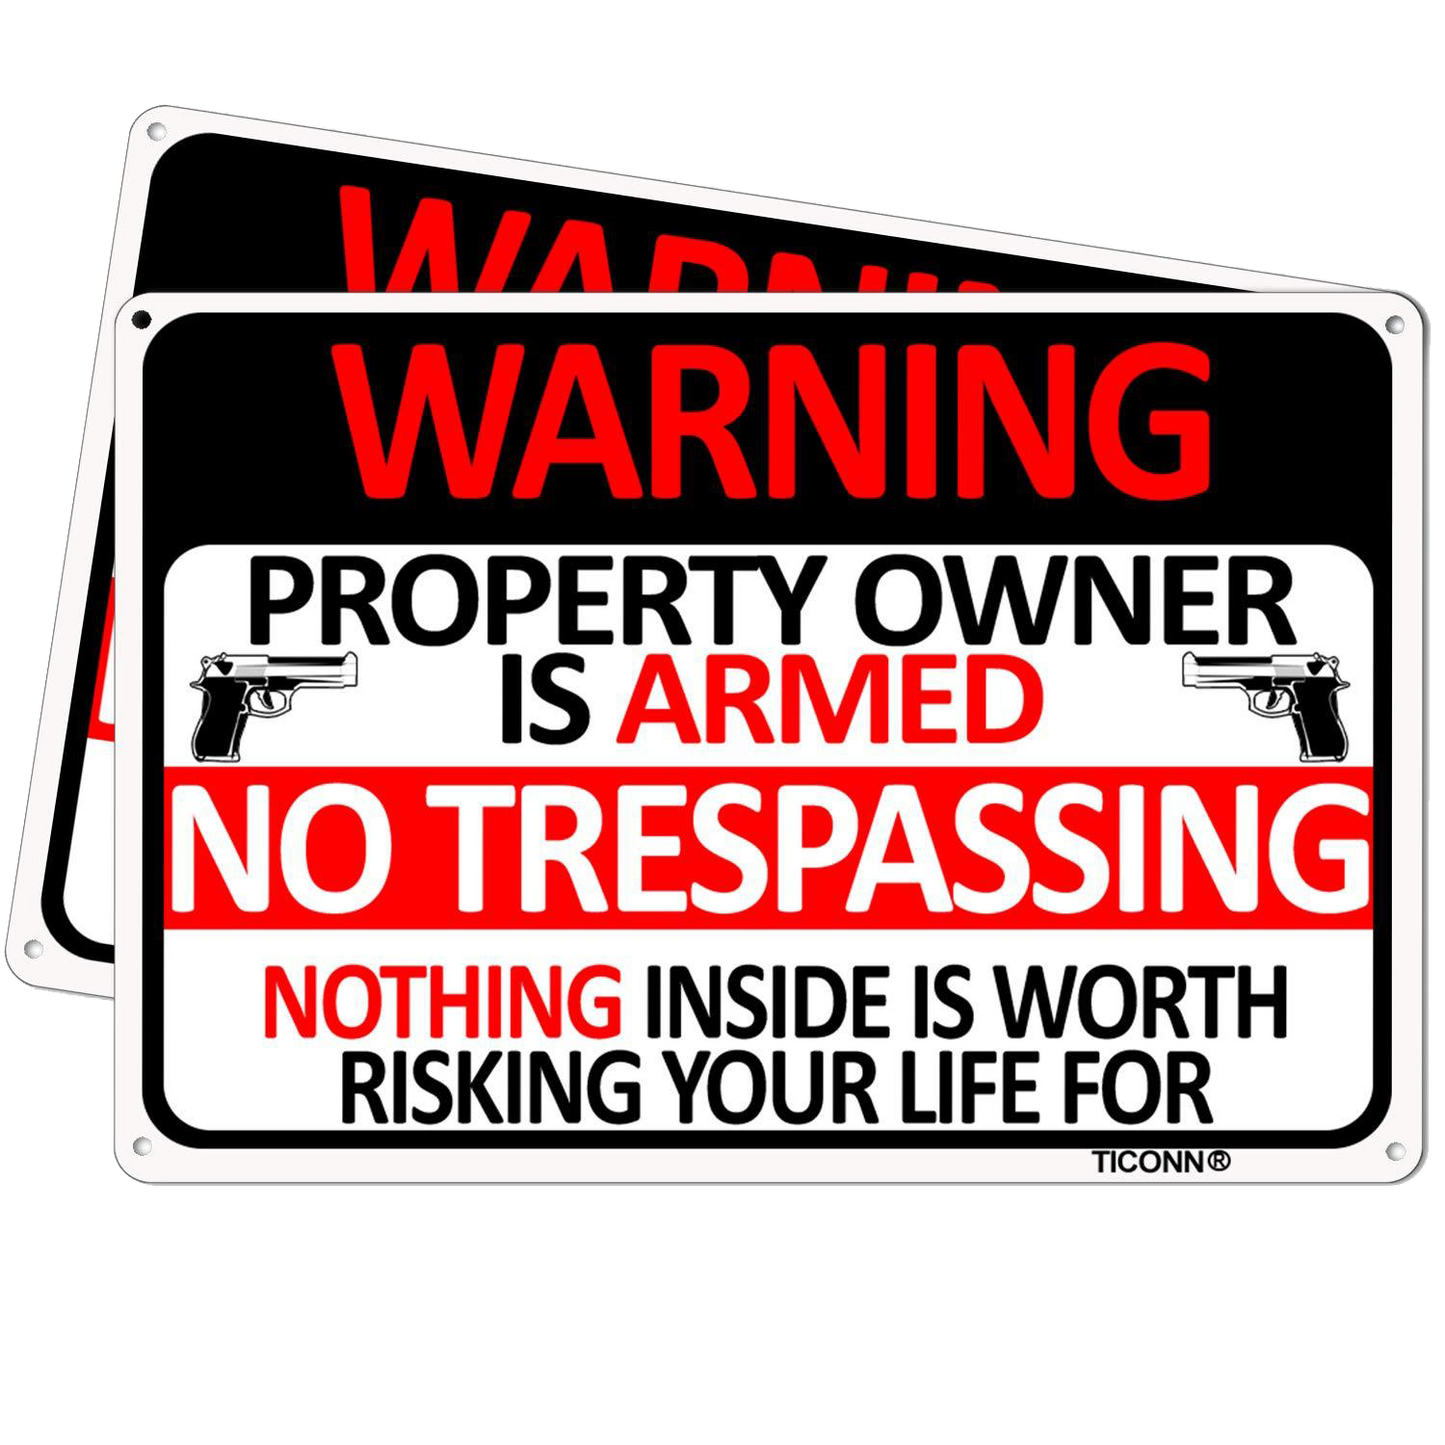 Pack 2 No Trespassing Sign Private Property Owner is Armed